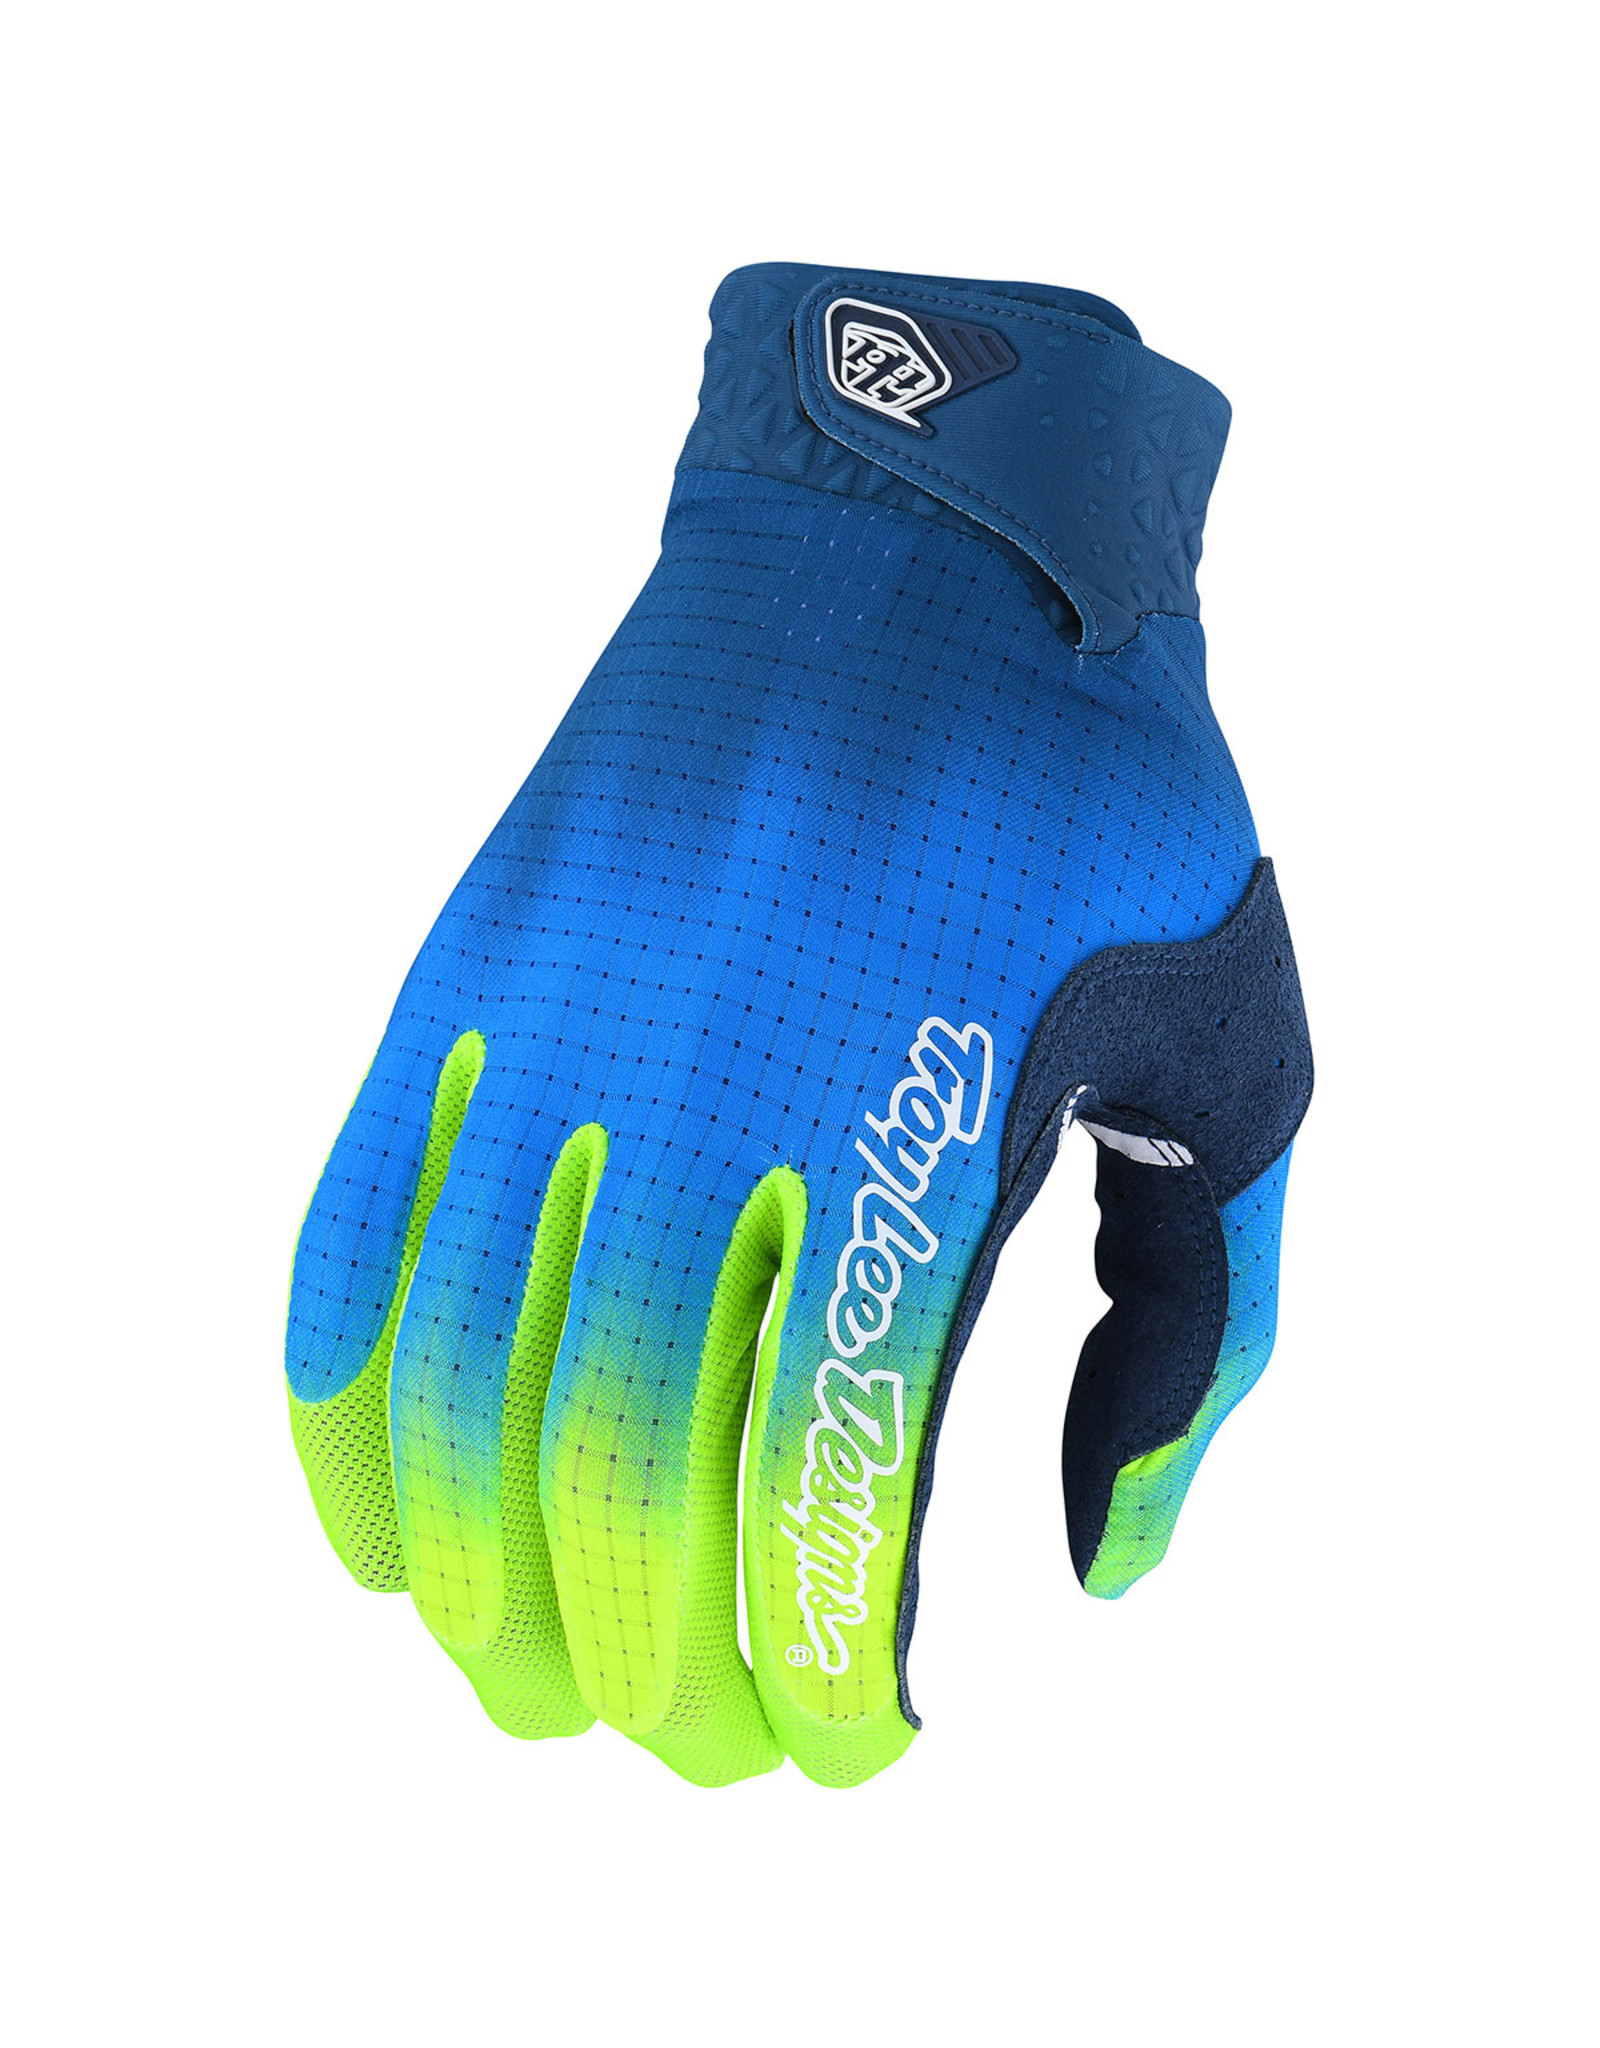 Troy Lee Designs Air Glove; Jet Fuel Navy/Yellow